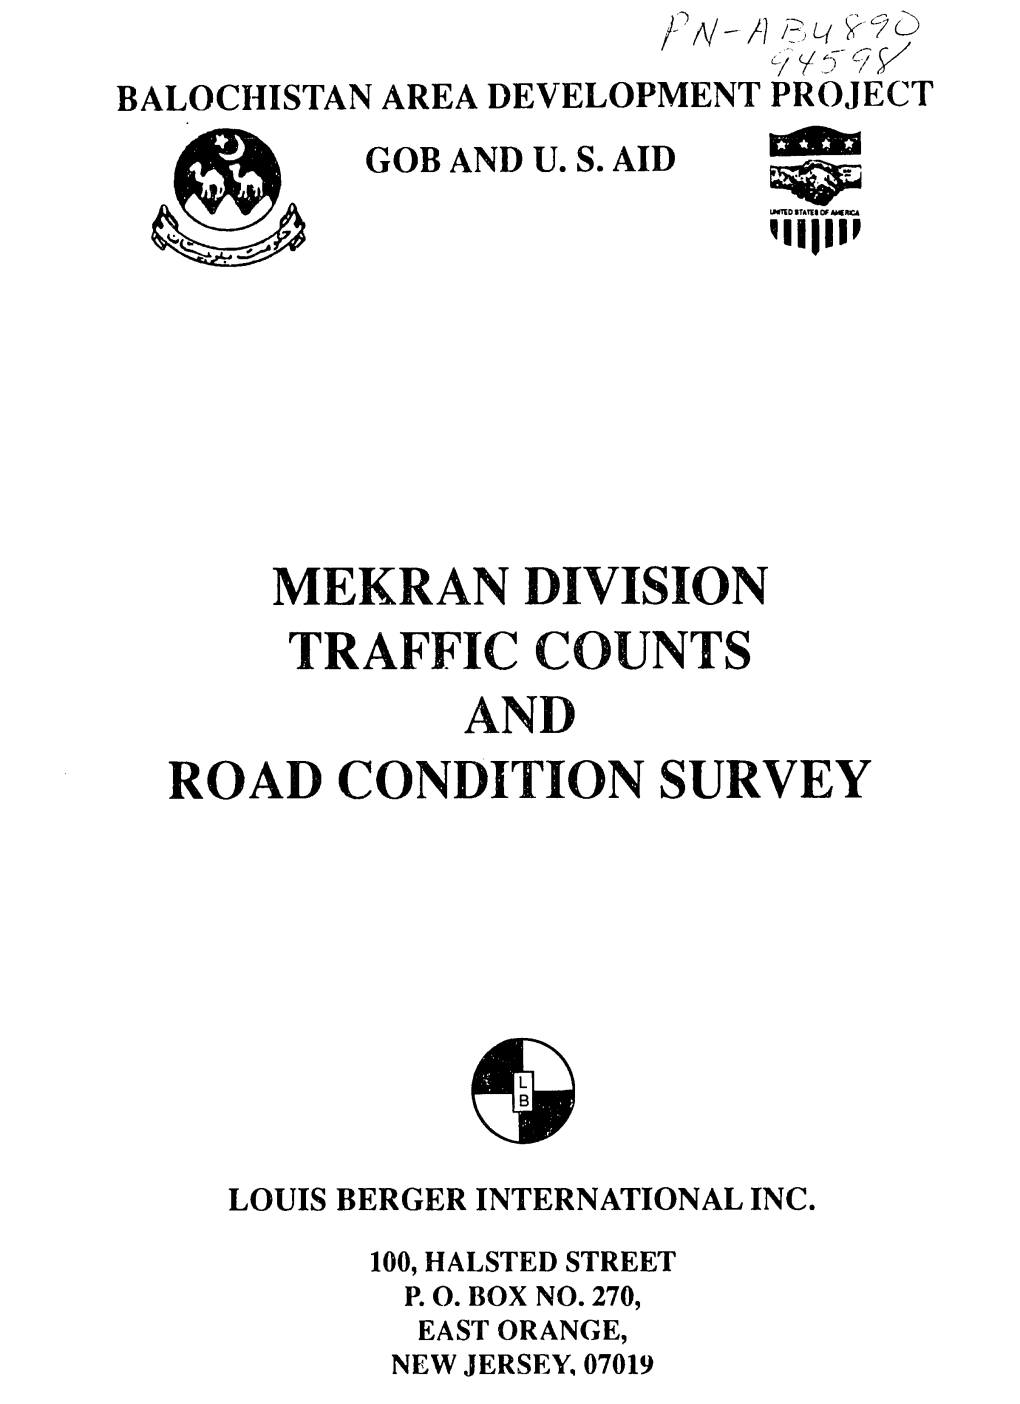 Mekran Division Traffic Counts and Road Condition Survey